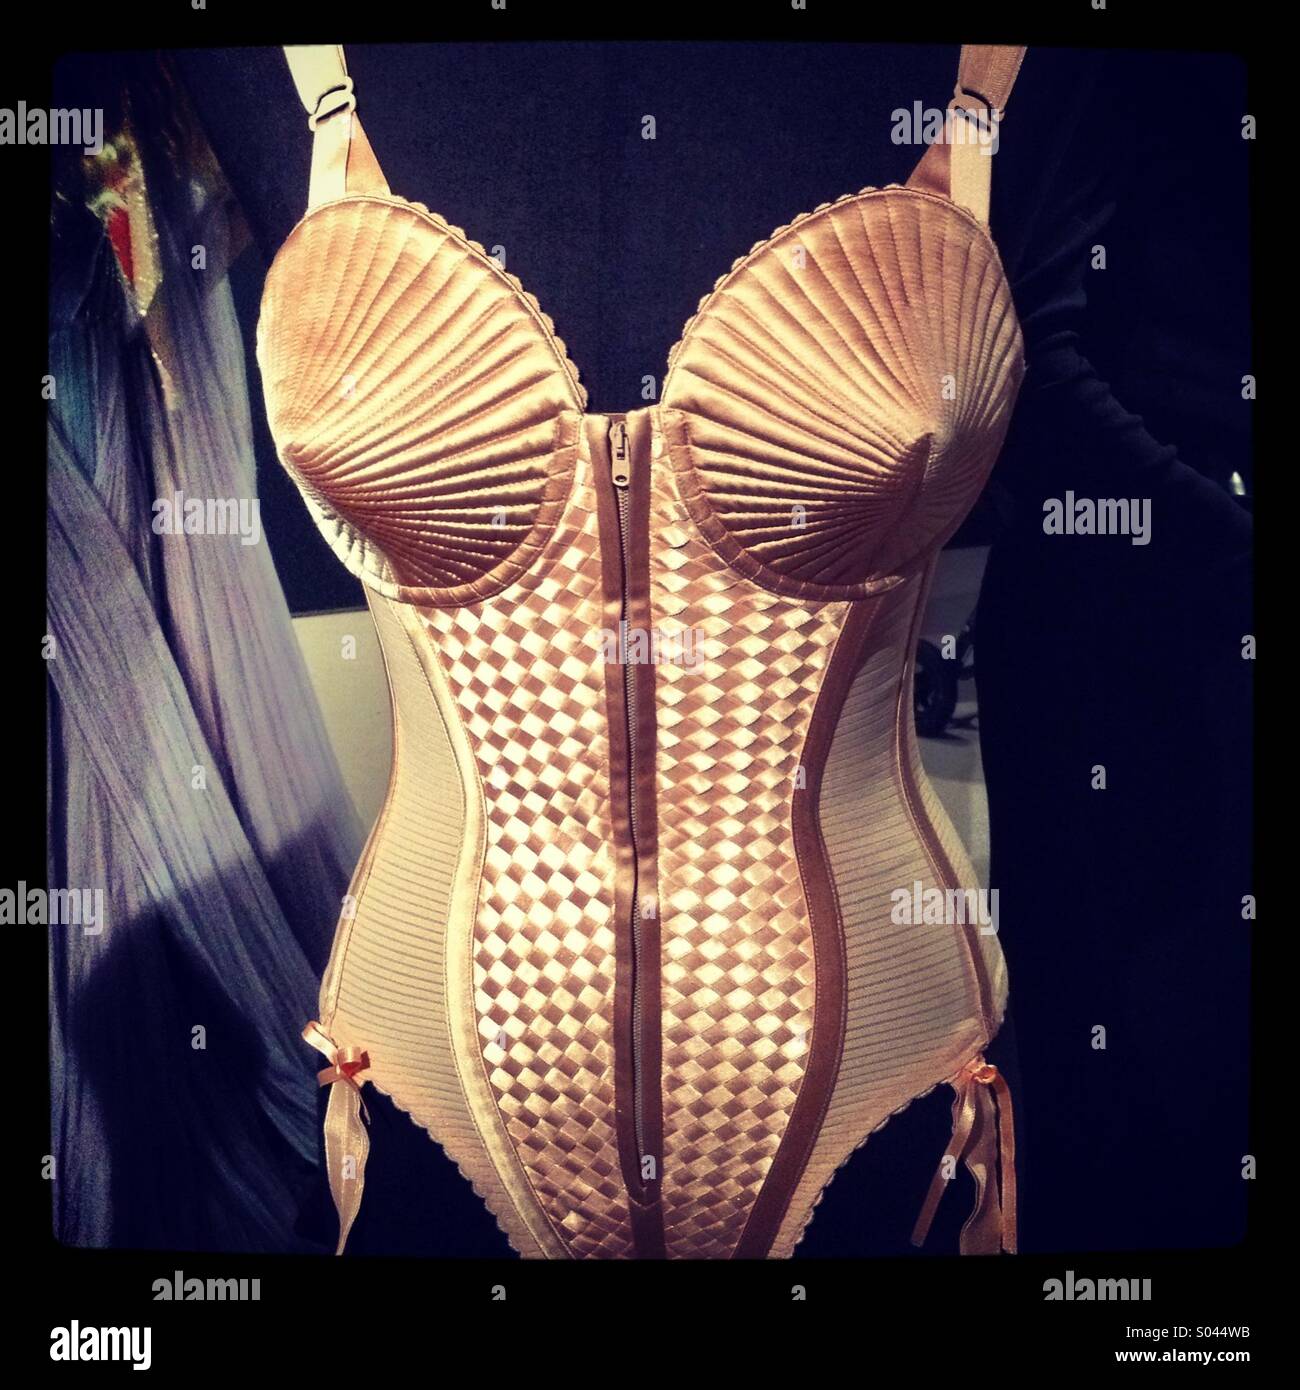 Madonnas iconic Cone bra / corset designed by Jean Paul Gaultier